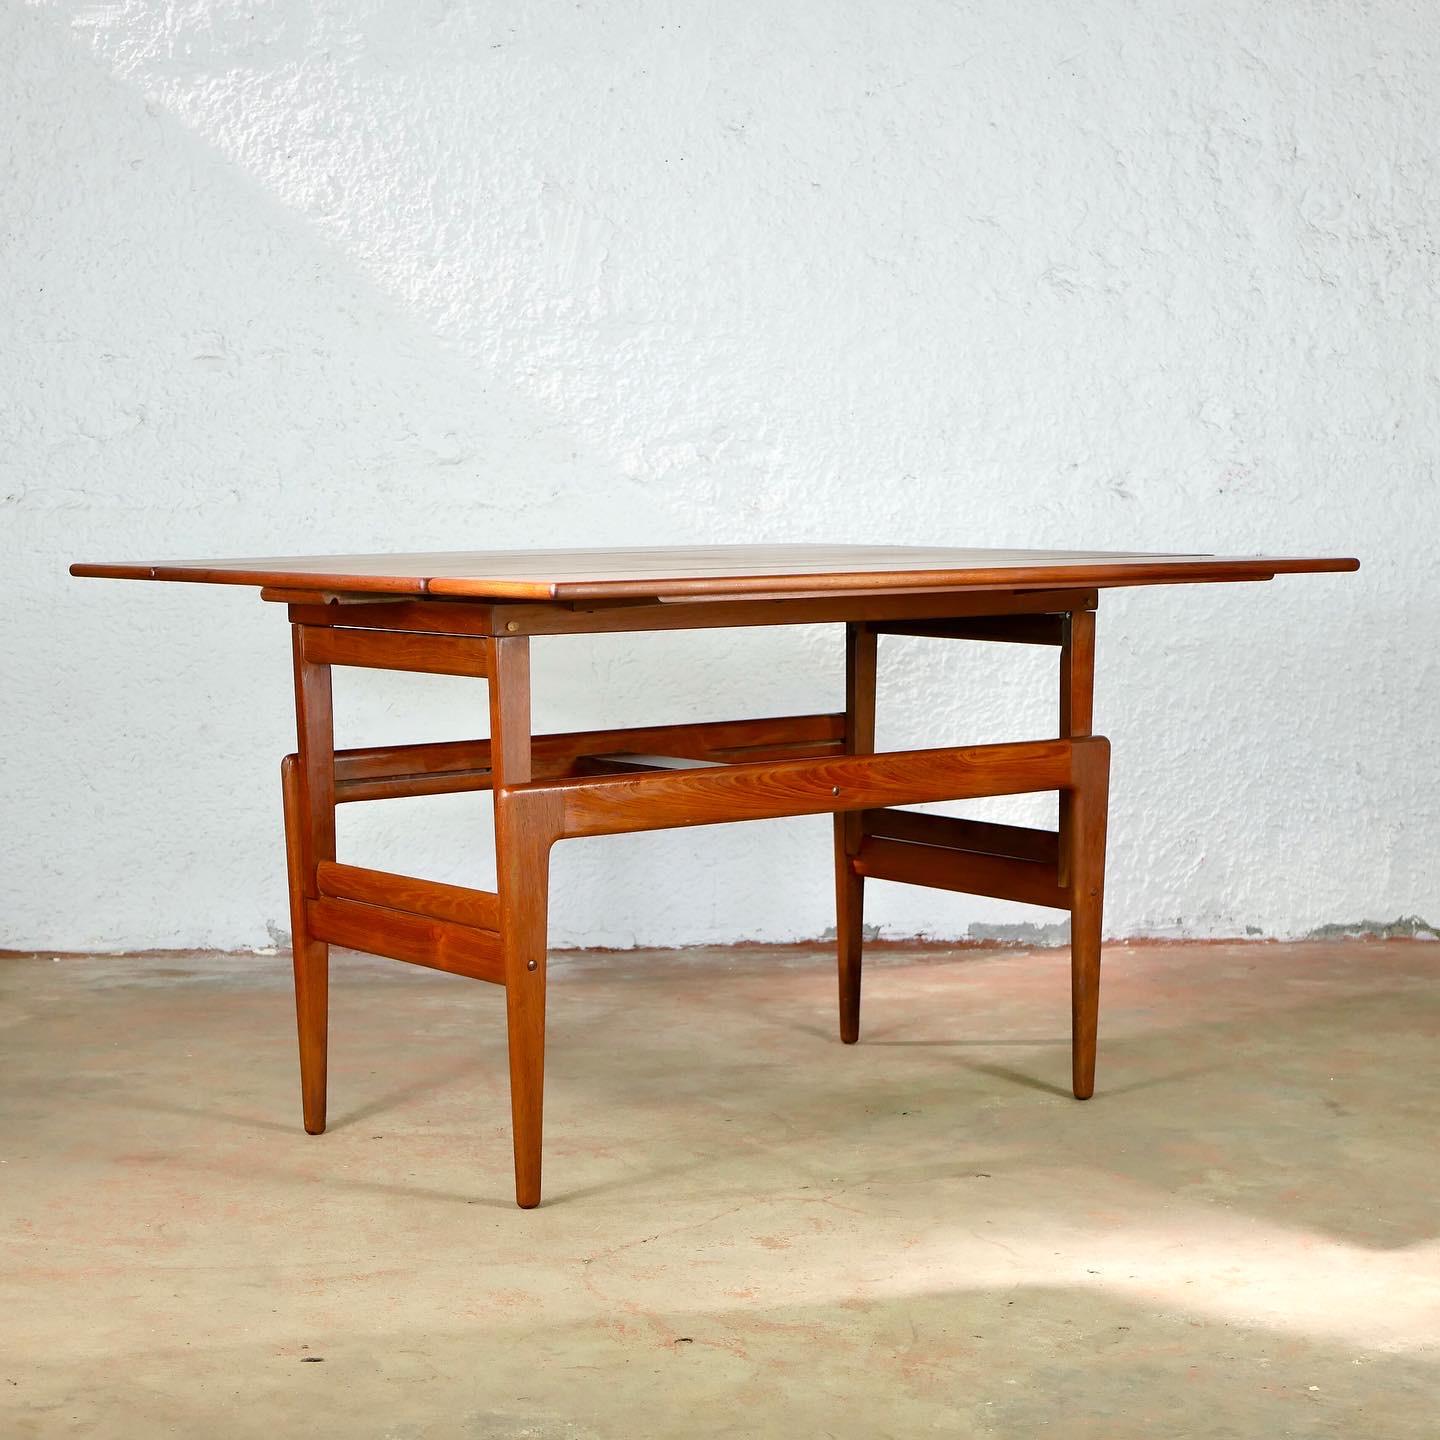 Gorgeous and ingenious system table, danish design by Kai Kristiansen for Vildbjerg Mobelfabrik, in beautiful teak wood, from the 1960s.
Modular and adaptable table that goes from a dining table to a coffee table in 10 seconds !
With 2 integrated